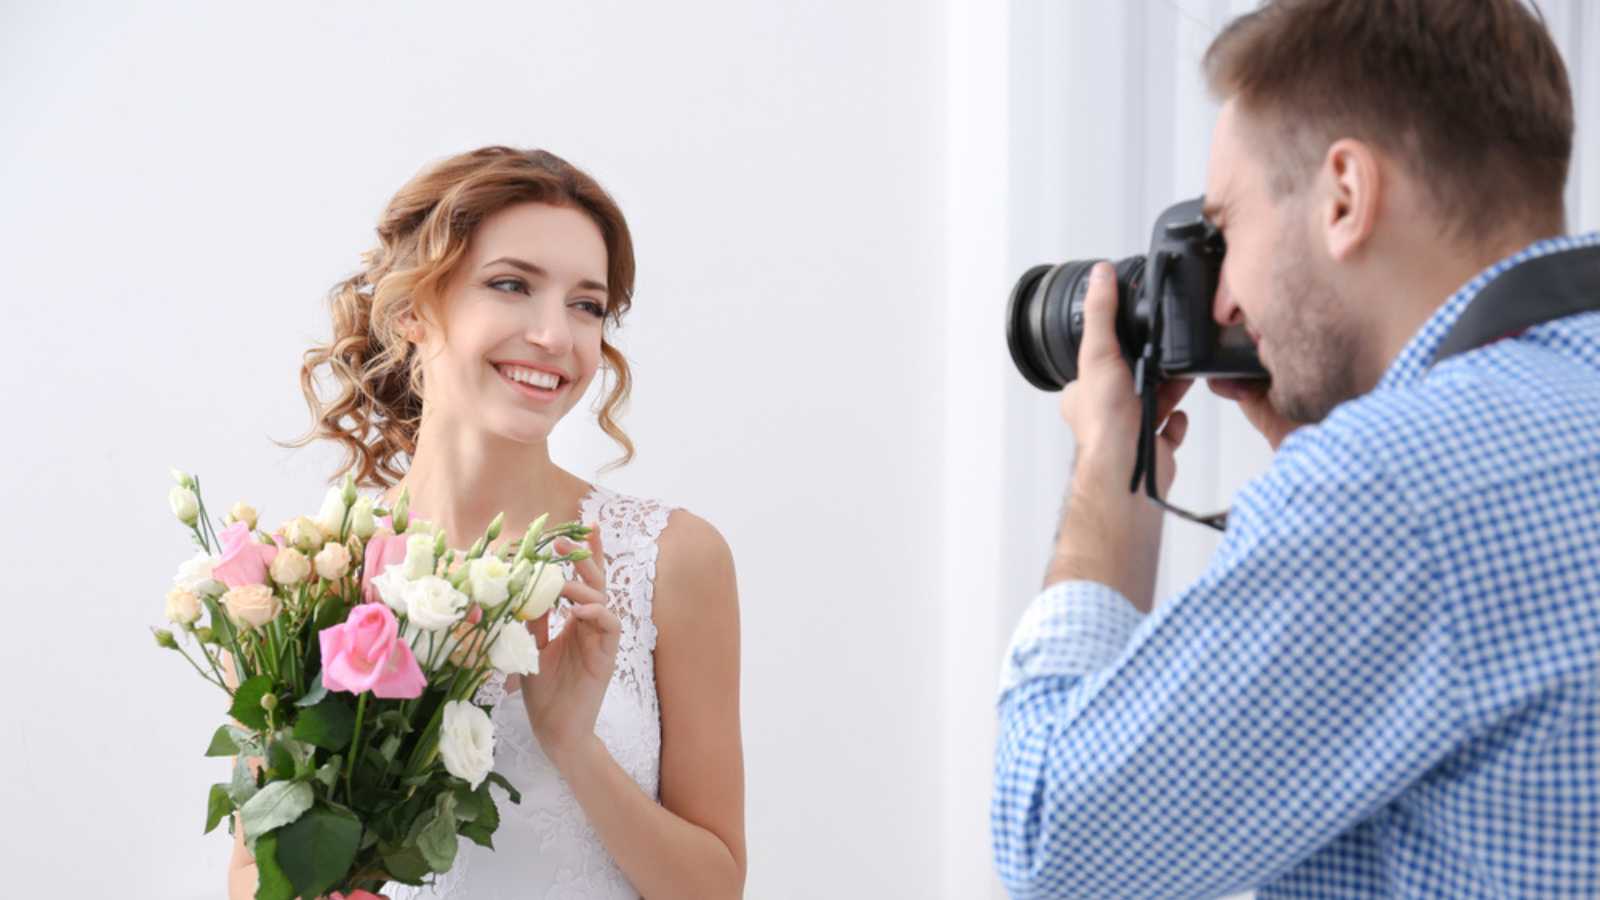 Photographer taking picture at wedding